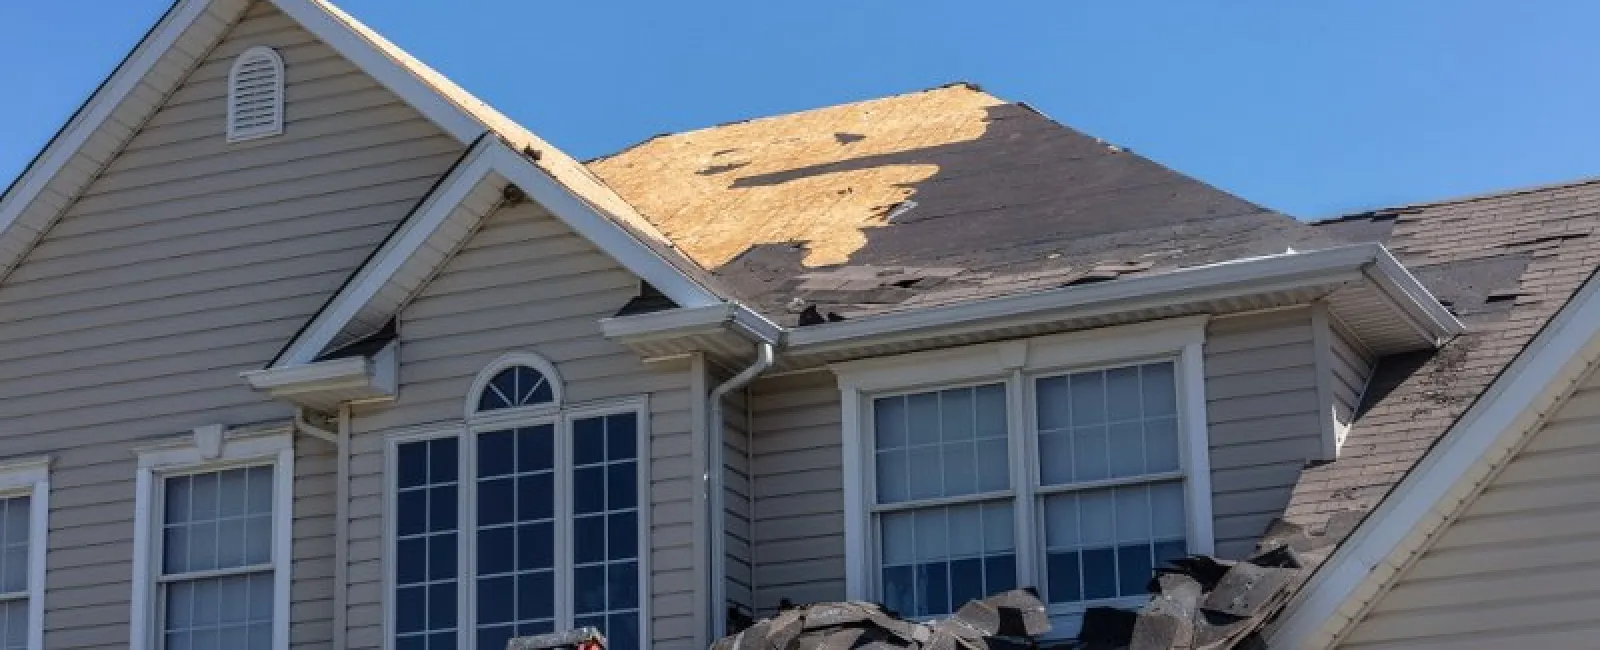 Common Reasons Not to DIY Roofing Projects